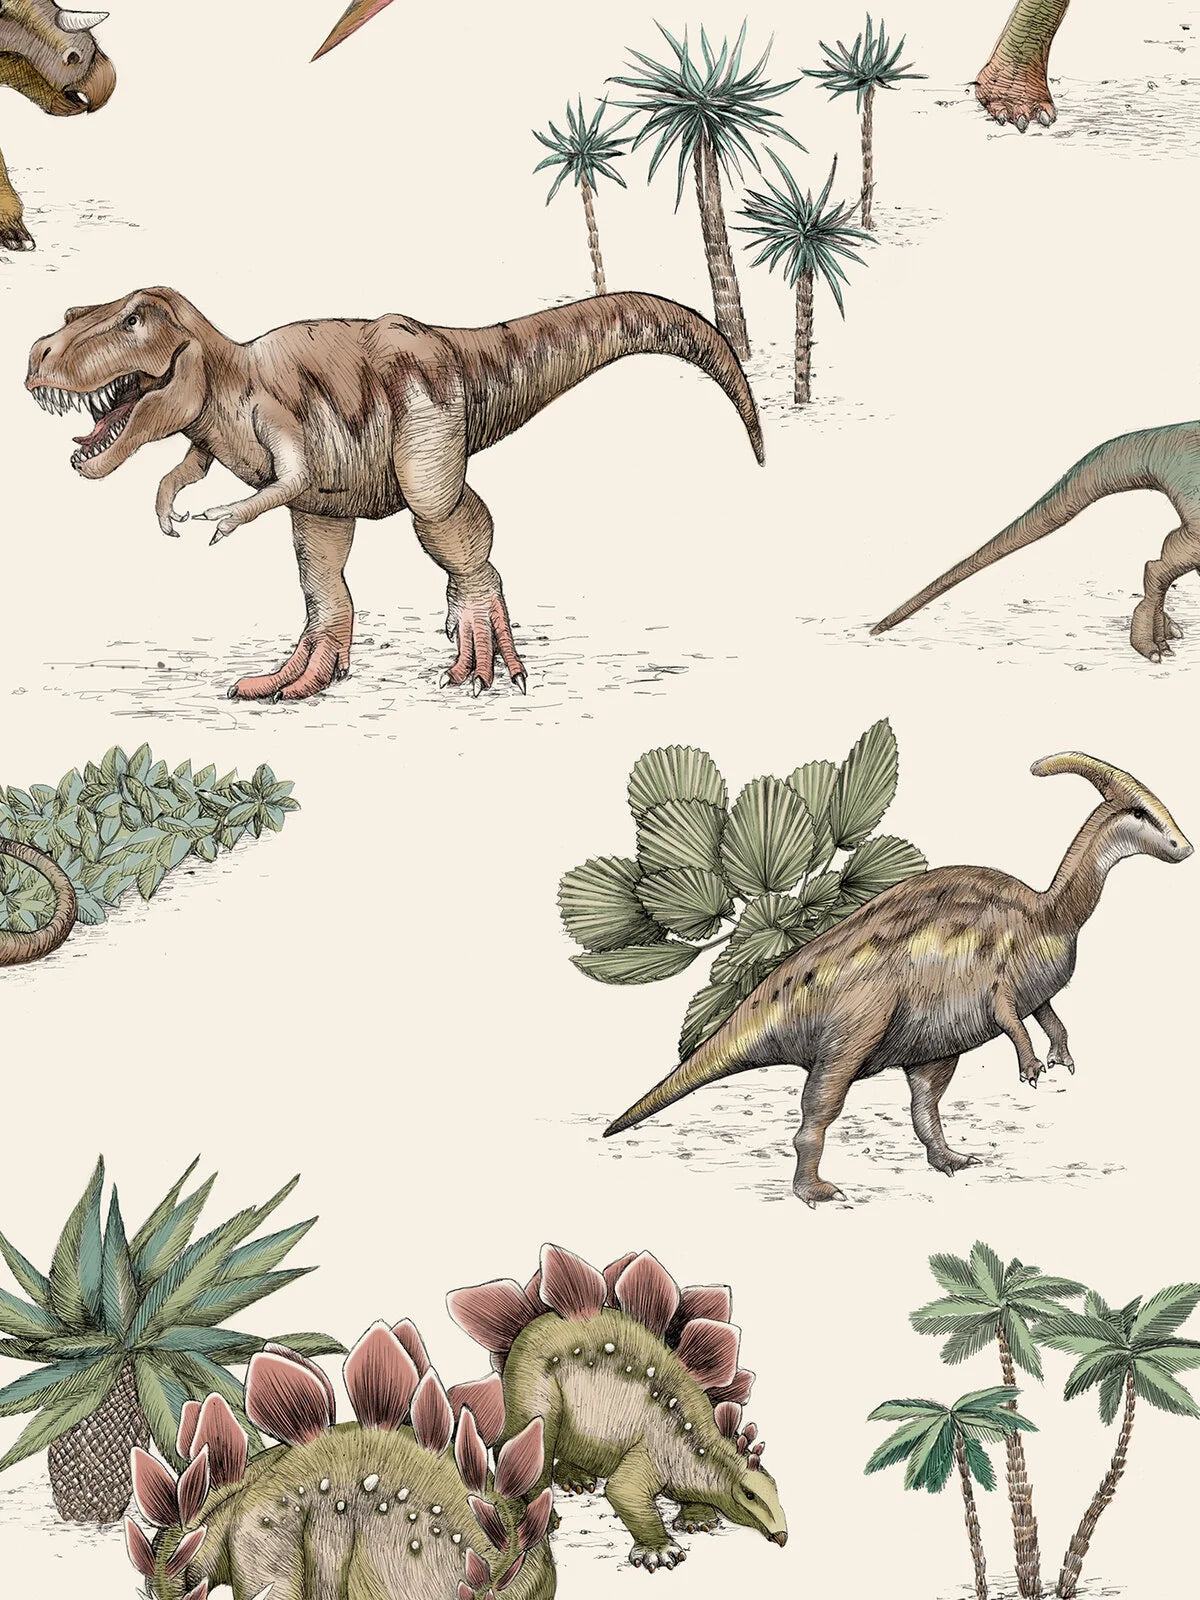 fantastically detailed dinosaur imagery featured in this special wallpaper.